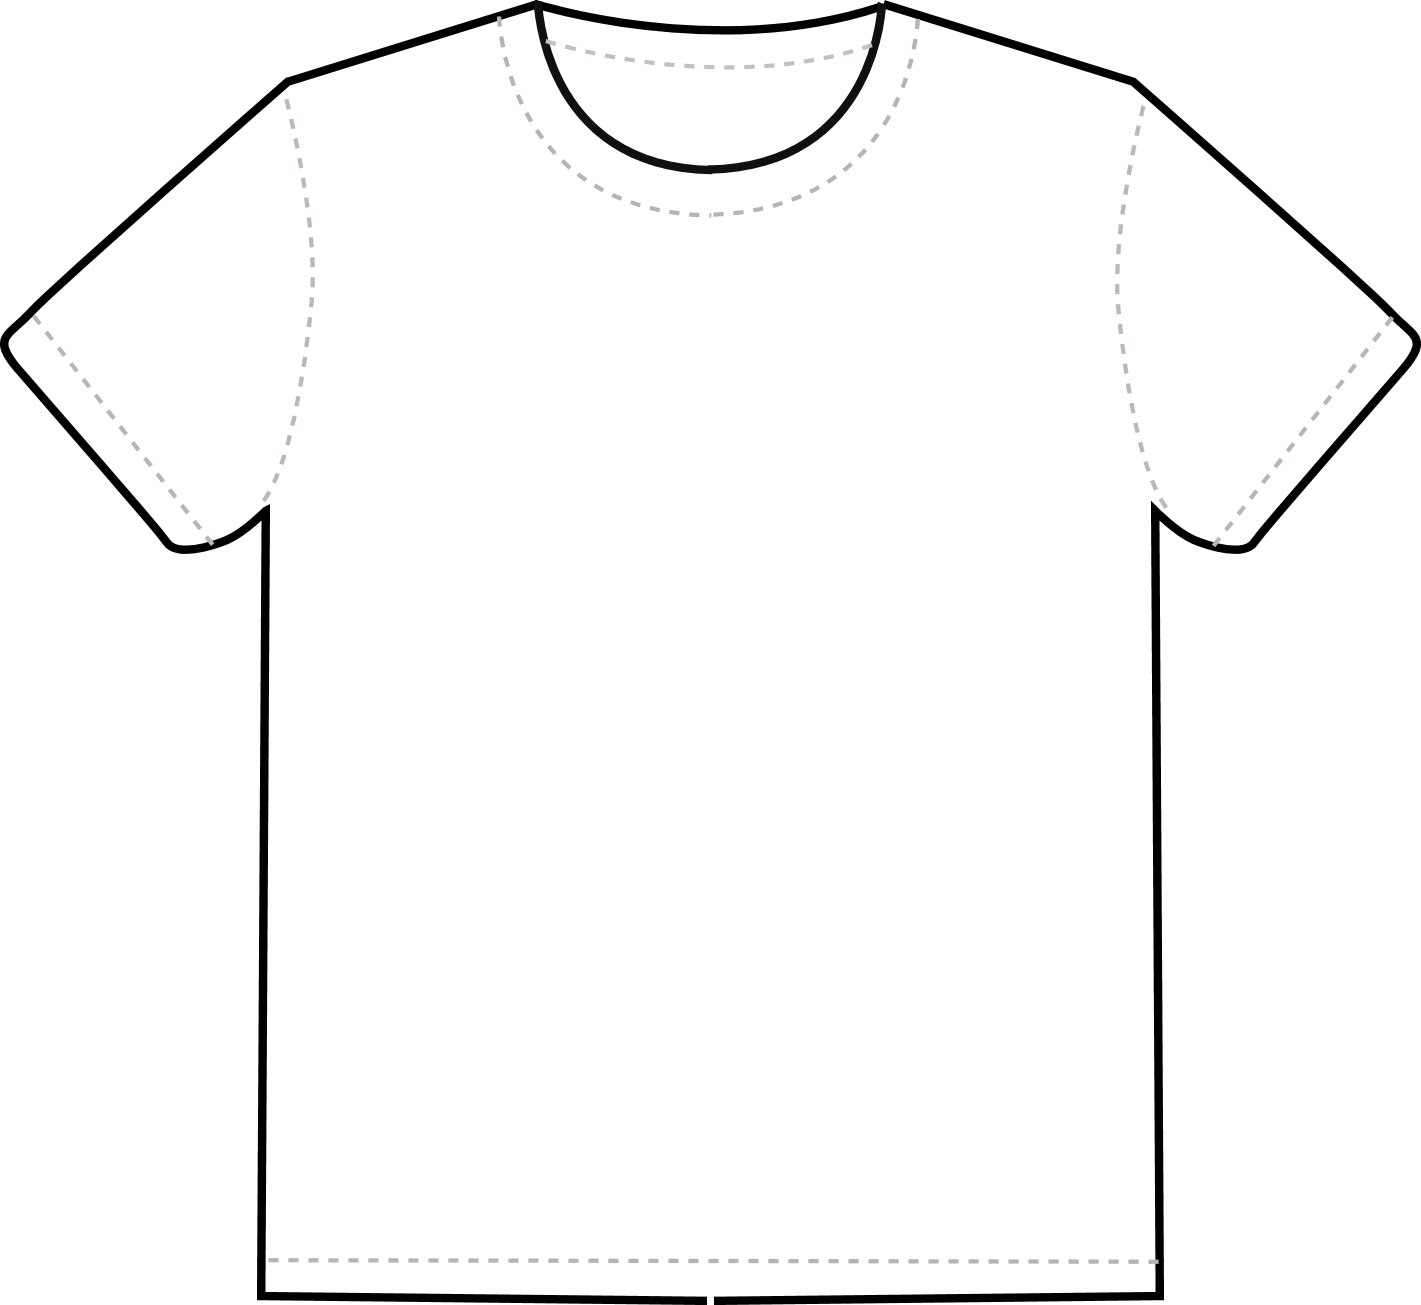 Free Blank Tshirt Outline Download Free Clip Art Free Clip Art On throughout Blank T Shirt Outline Template